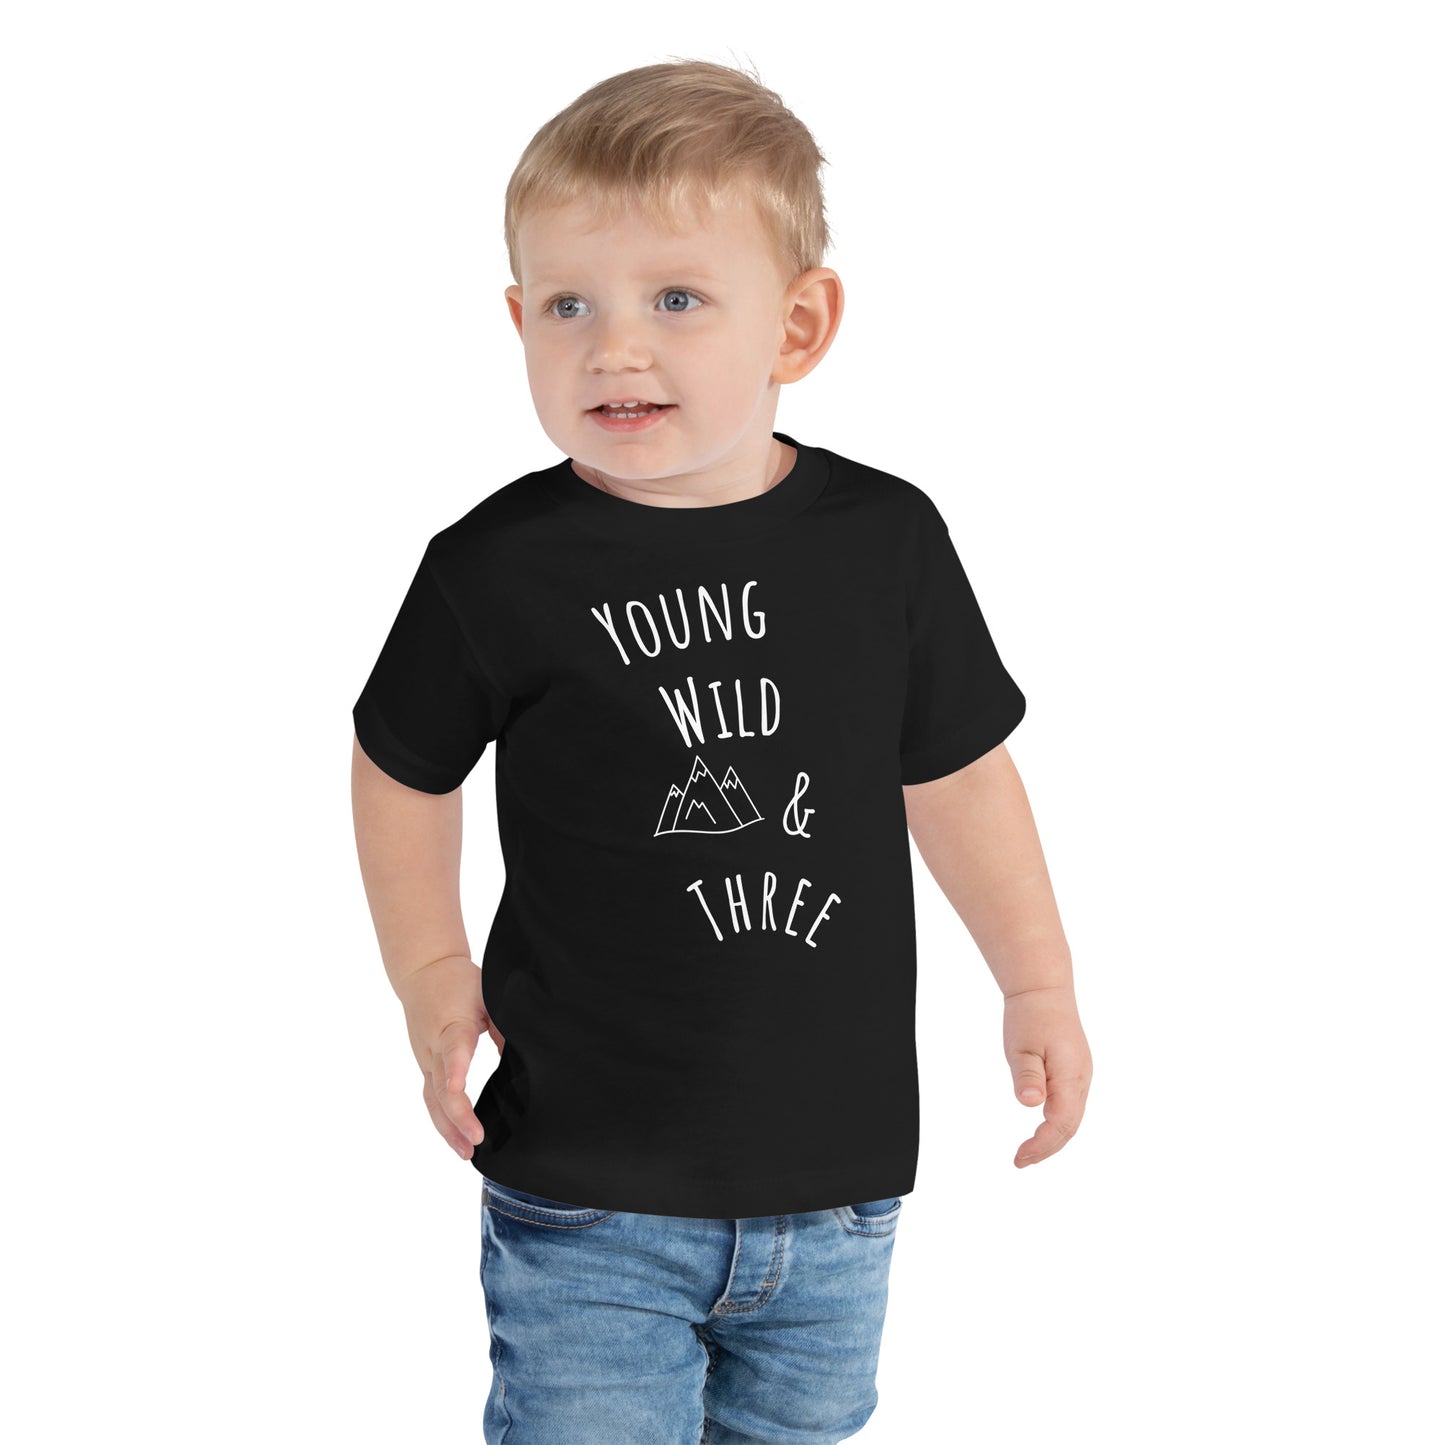 Toddler Short Sleeve Tee - Young, wild and three B/W